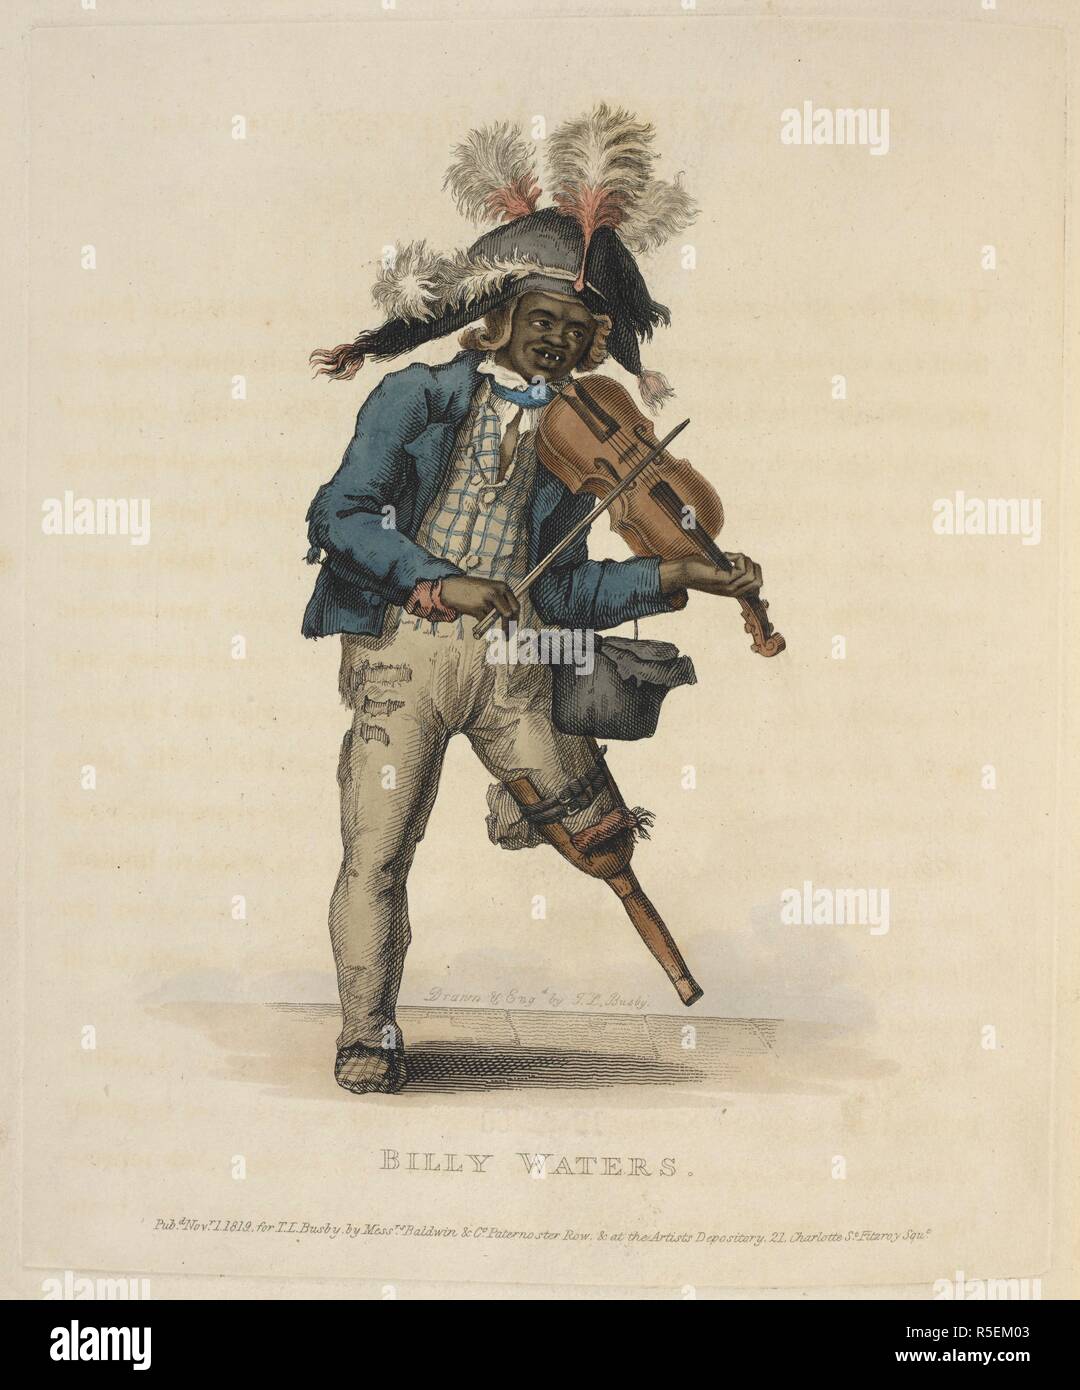 Billy Waters.  Billy Waters (c. 1778â€“1823) was a black man who busked in London in the nineteenth century by singing, playing the violin and entertaining theatre goers with his 'peculiar antics'. He became famous when he appeared as a character in William Thomas Moncrieff's Tom and Jerry, or Life in London in 1821.  His striking image was established by his African ancestry, a naval uniform, his peg leg, his violin and the addition of a feathered hat.  . Costume of the Lower Orders of London. Painted and engraved from nature by T. L. Busby. London : Baldwin & Co., [1820]. Source: 7742.e.19.( Stock Photo